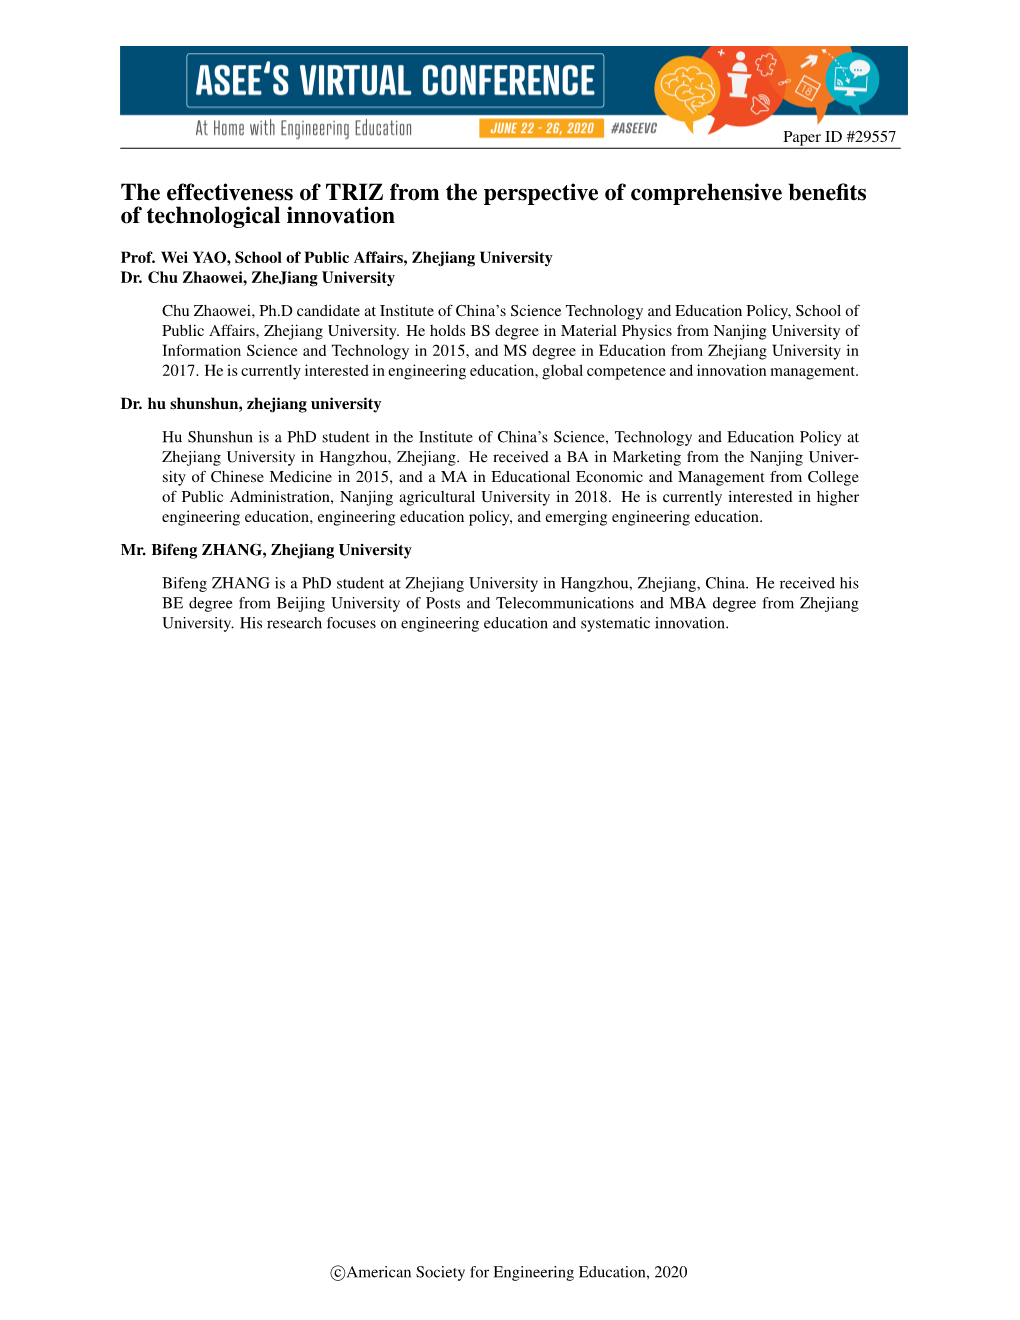 The Effectiveness of TRIZ from the Perspective of Comprehensive Beneﬁts of Technological Innovation